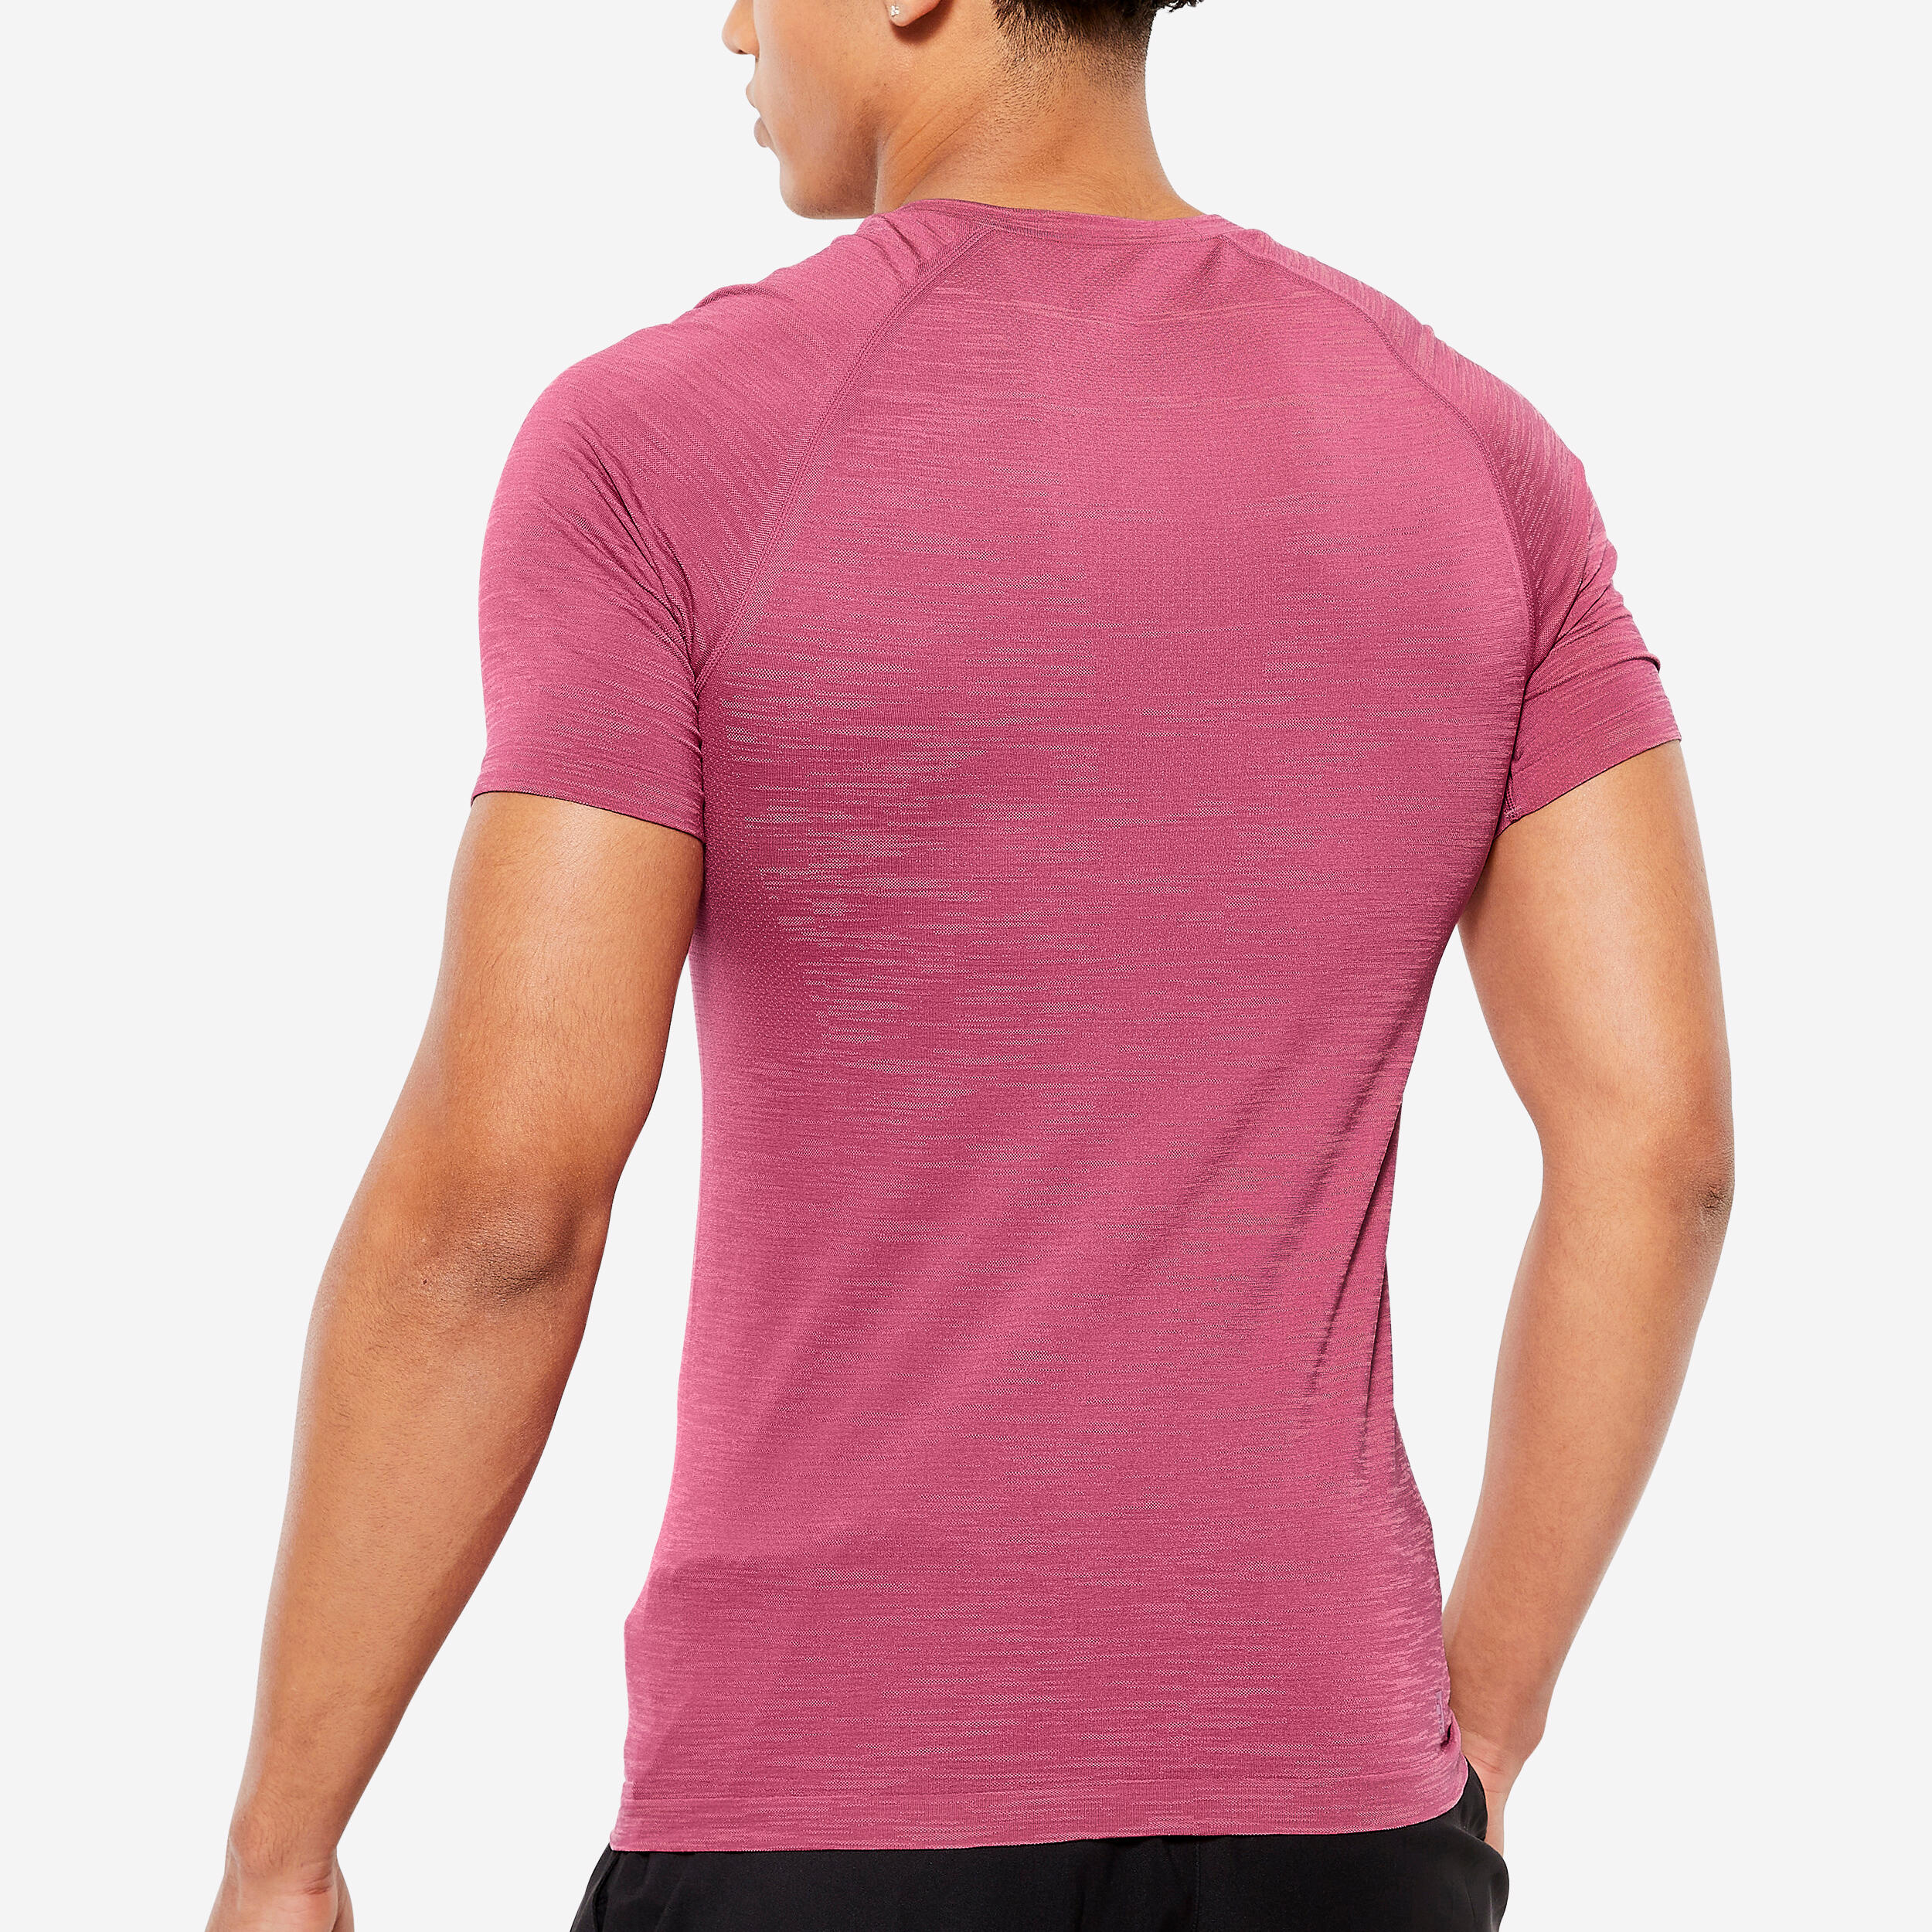 Weight Training Compression T-Shirt - Pink Marl 5/6